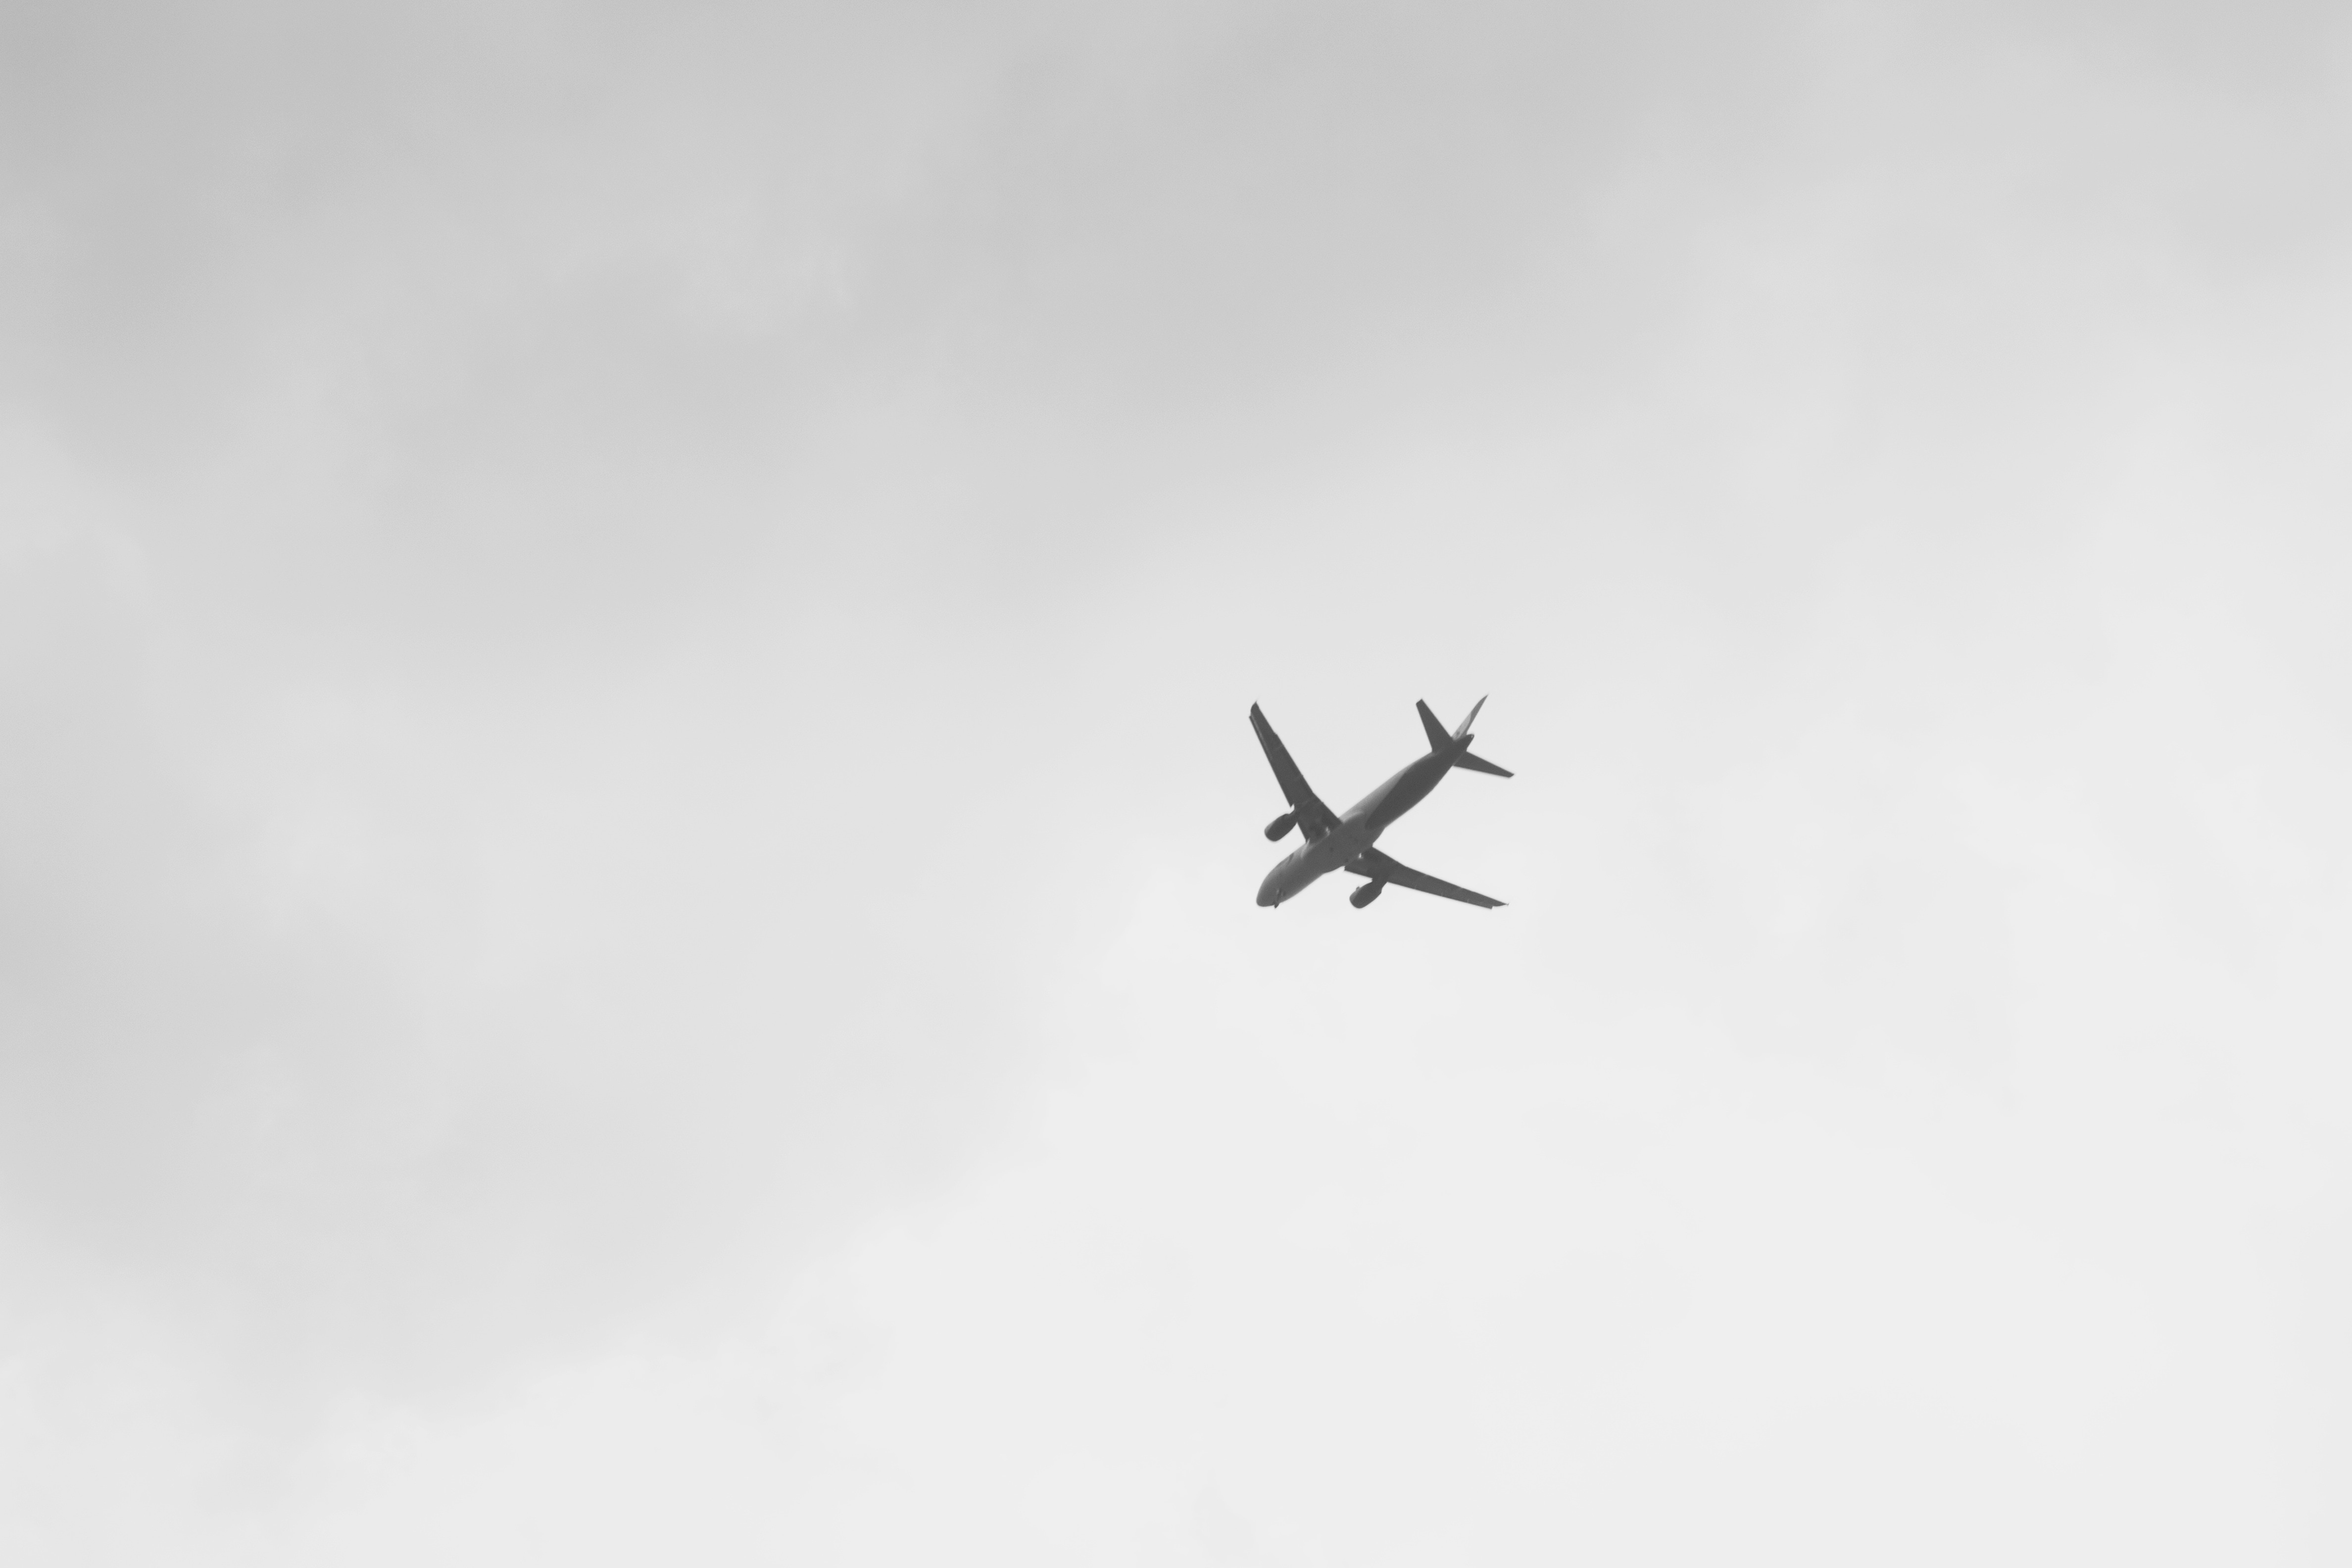 gray scale photo of air plane